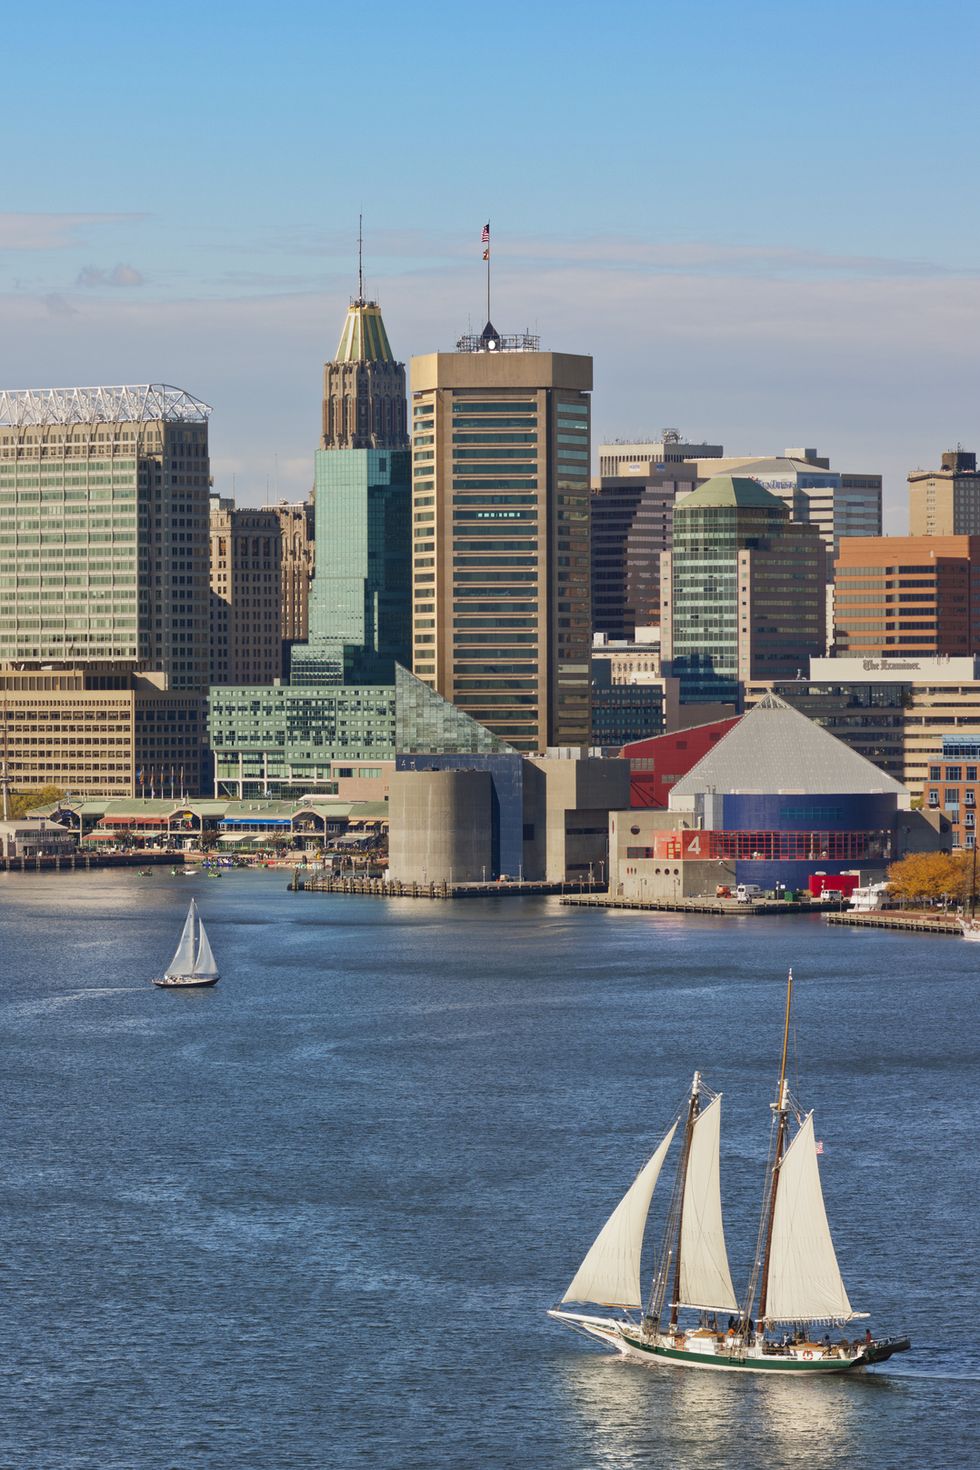 baltimore skyline and inner harbor with three sail boat on the water in foreground and two sail boat in background